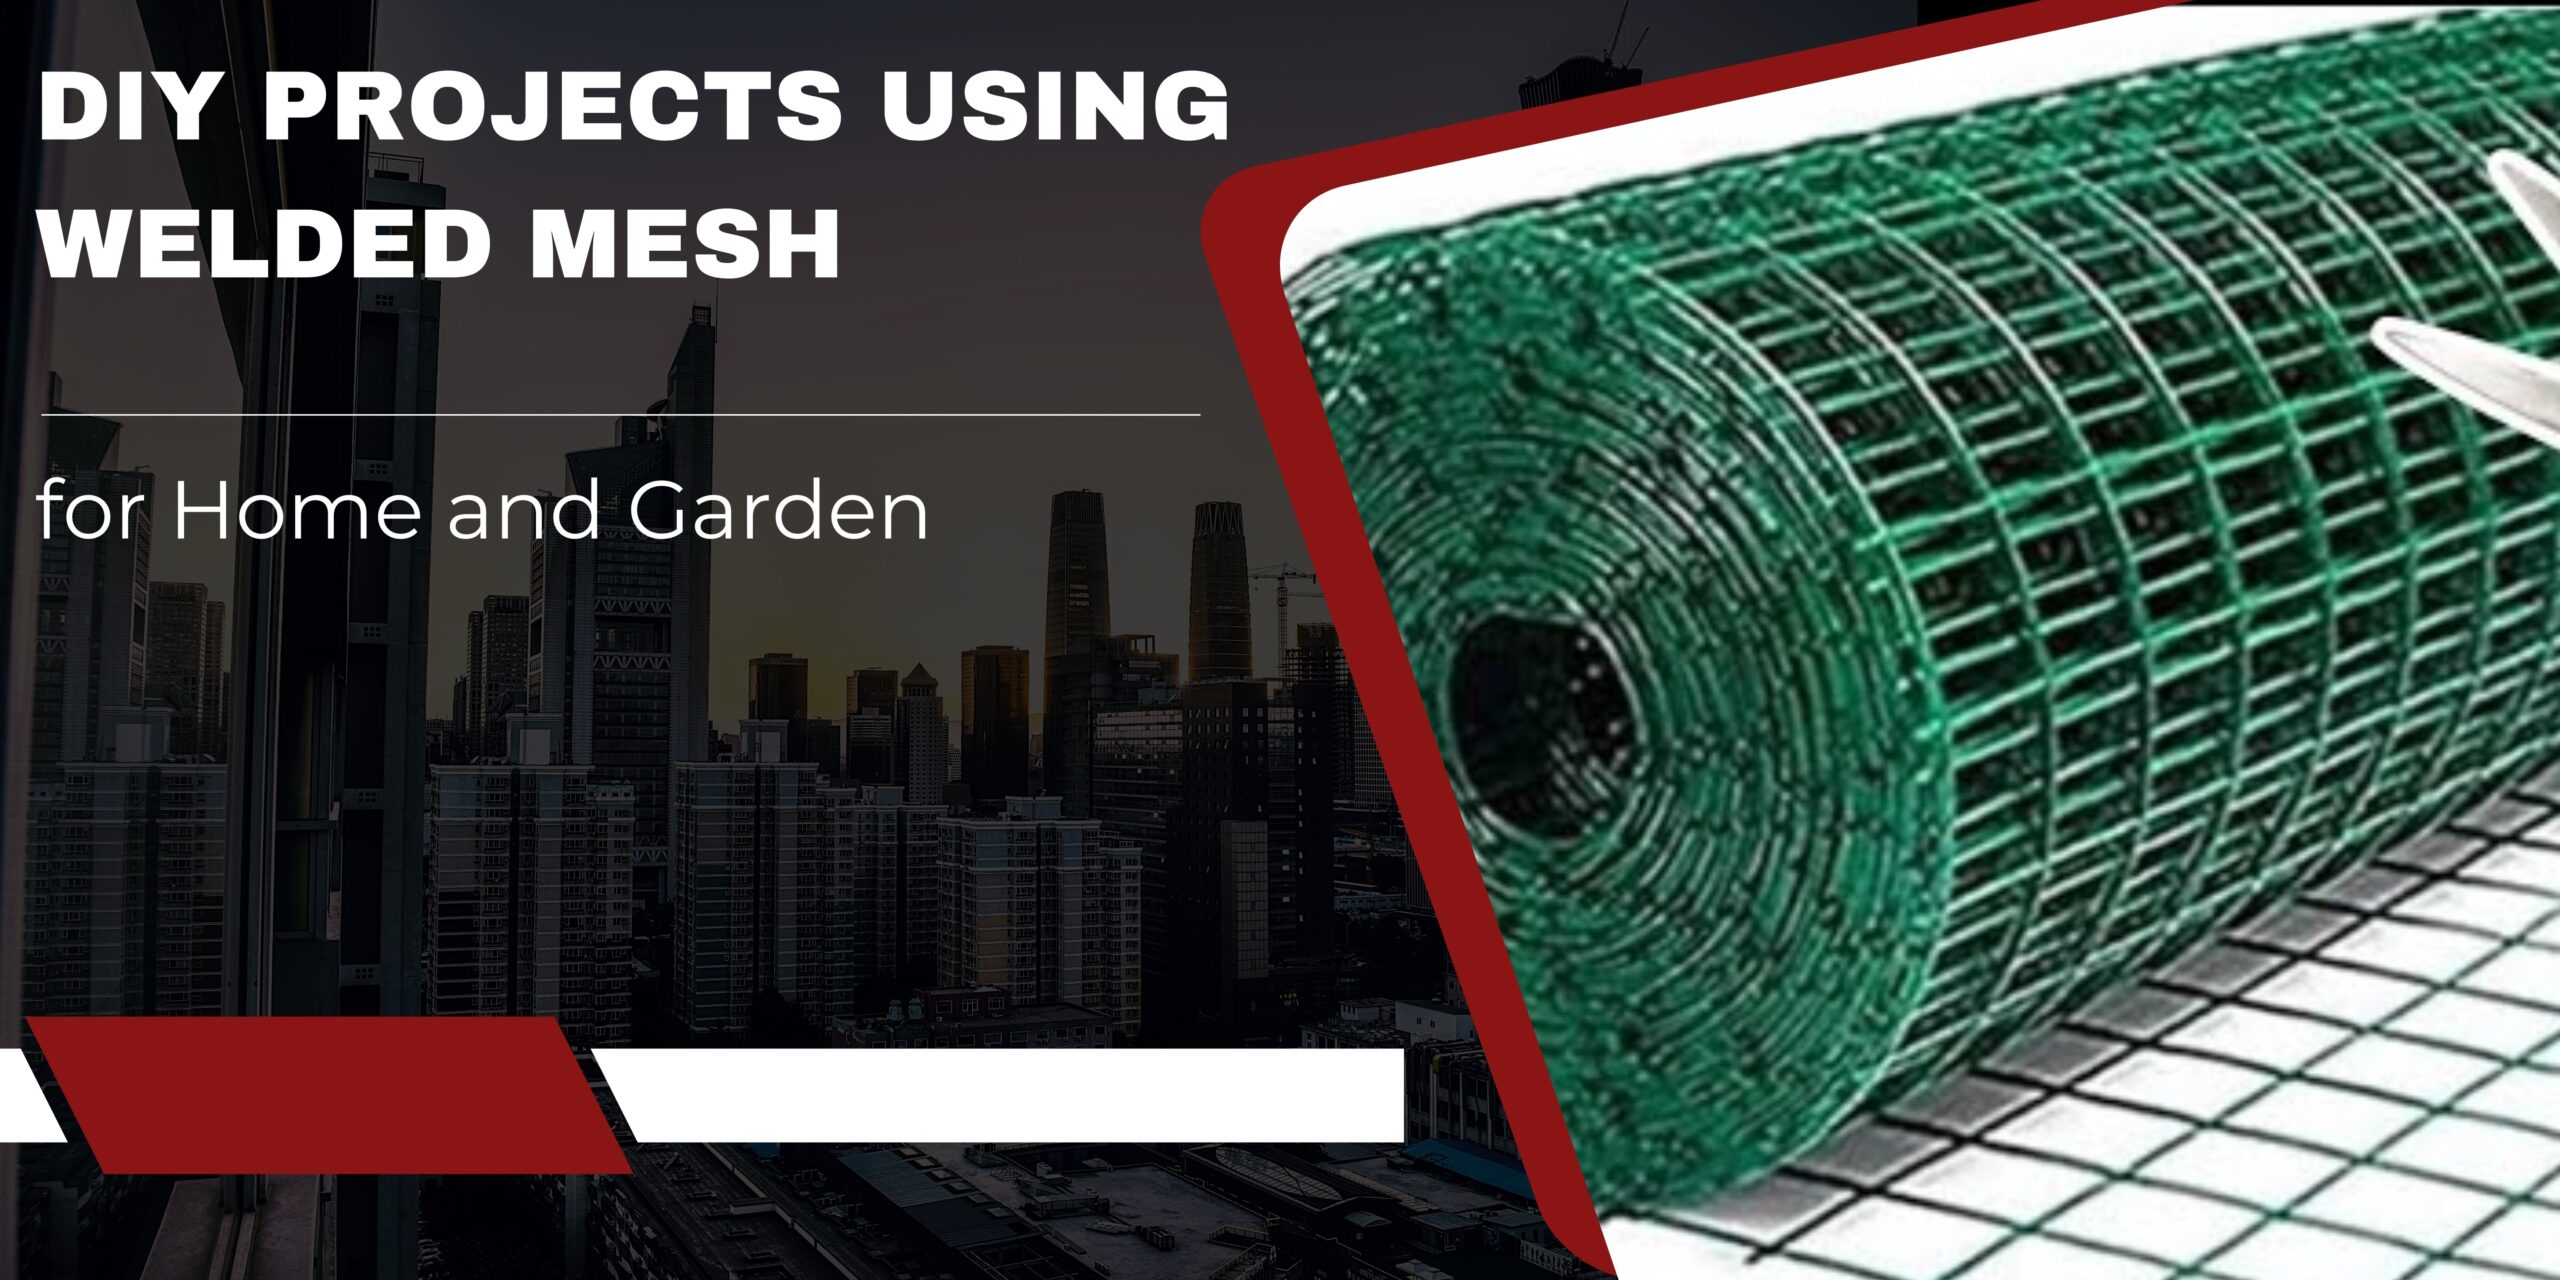 diy projects using welded mesh for home and garden